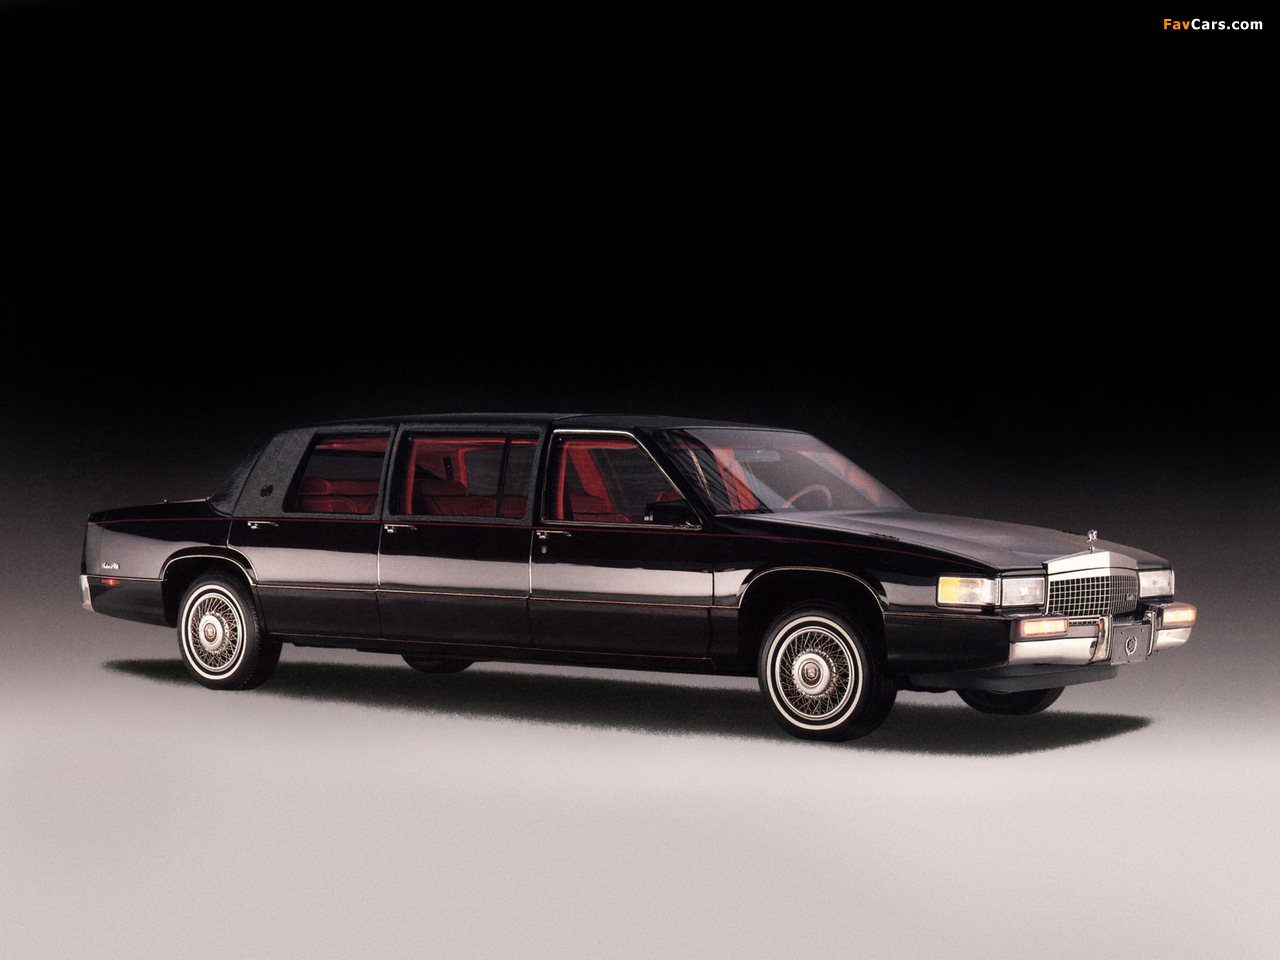 Pictures of Sayers & Scovill Cadillac DeVille Professional Limousine 1992 (1280 x 960)